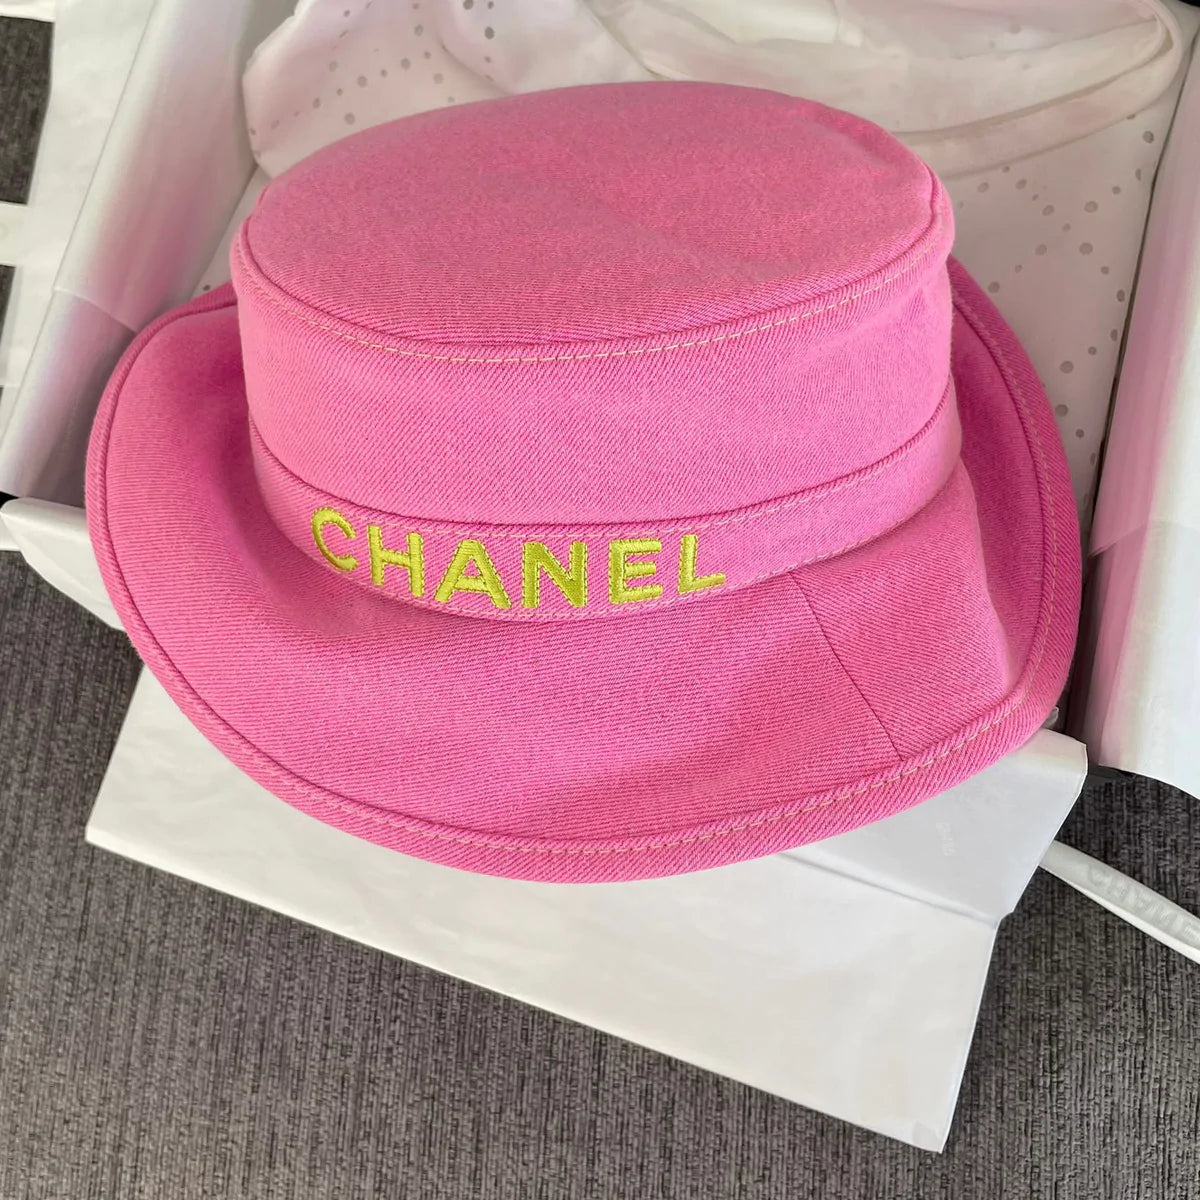 Chanel Hat Pink Bucket, Size Small, New in Dustbag